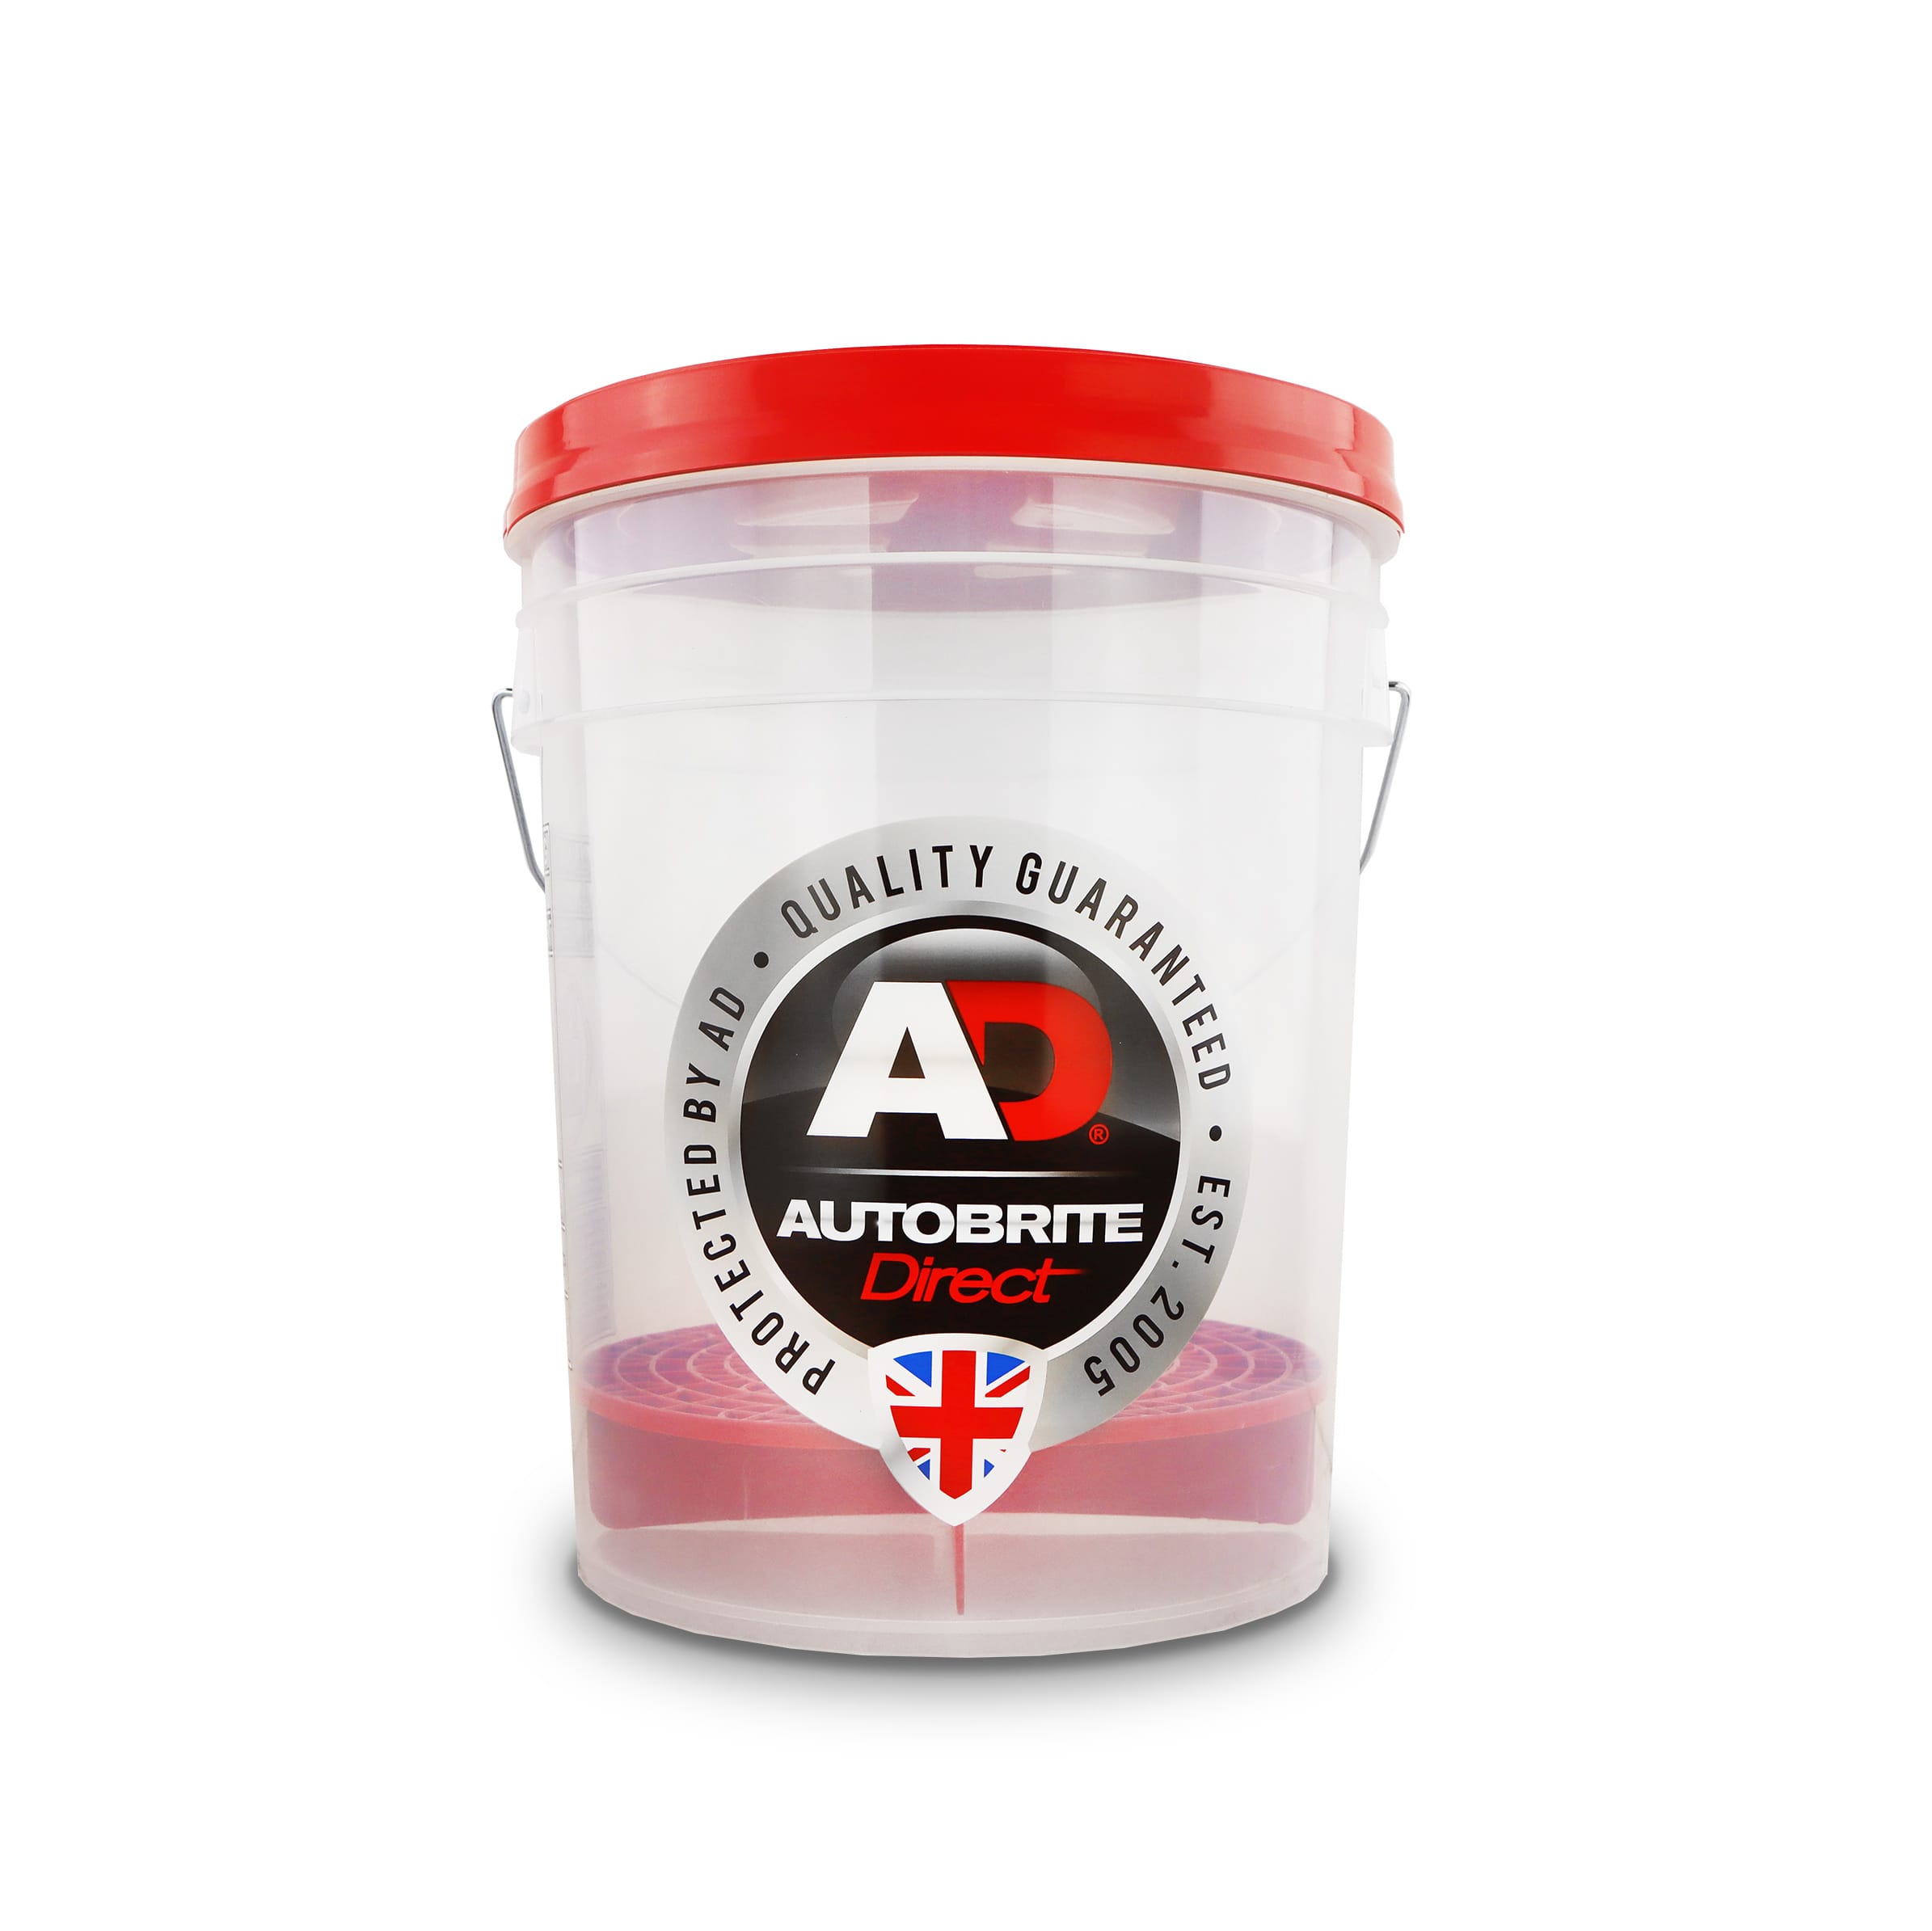 Autobrite Direct Clear Detailing Bucket with Grit Guard & Gamma Seal